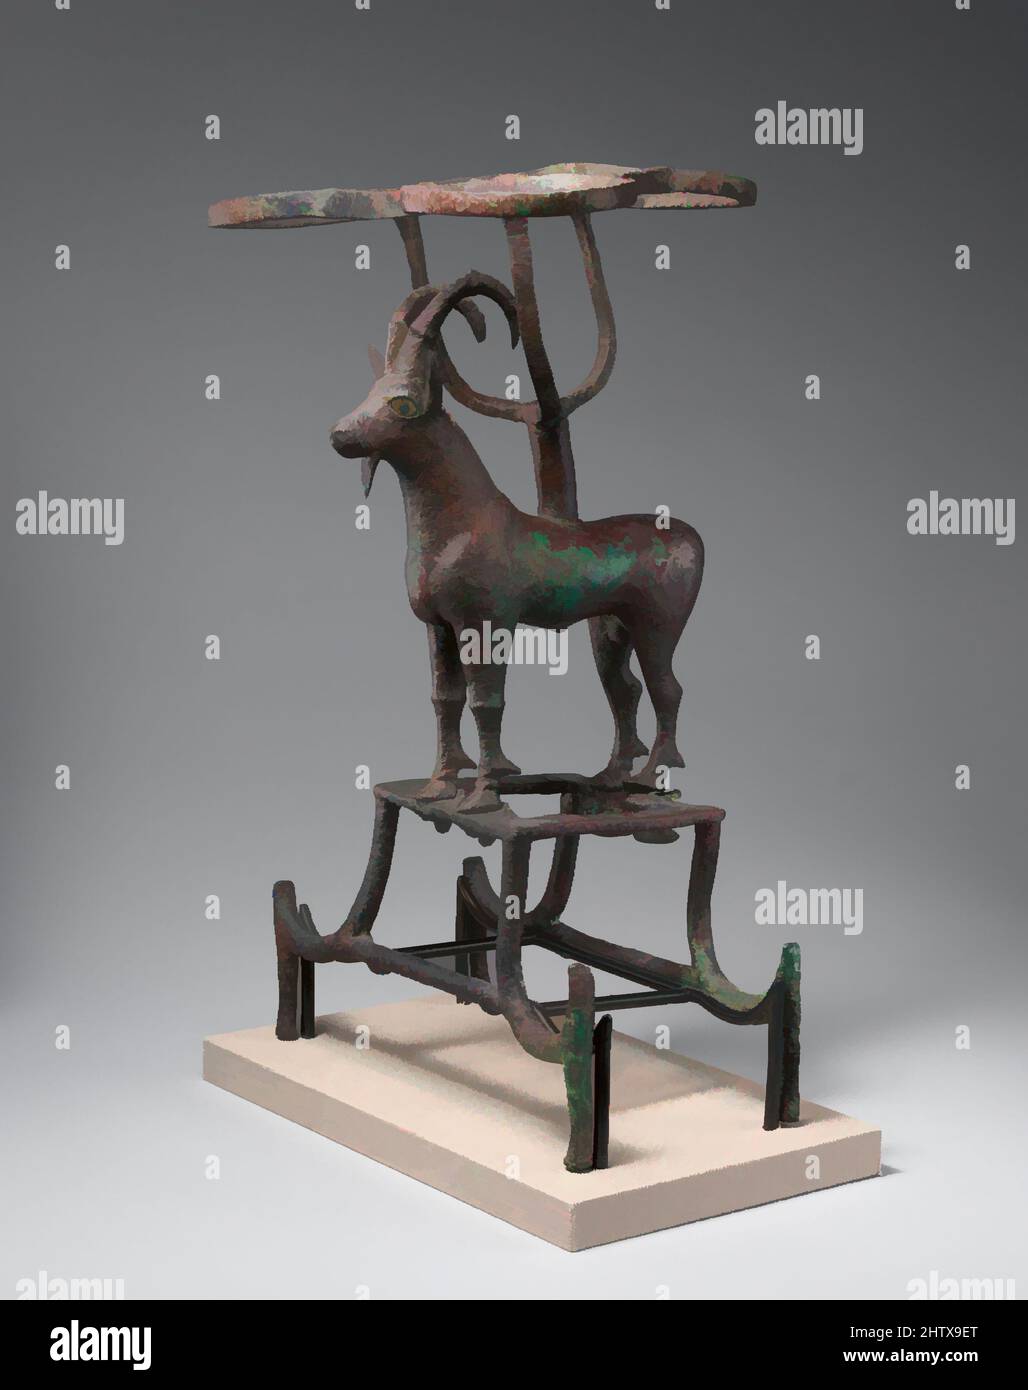 Art inspired by Vessel stand with ibex support, Early Dynastic III, ca. 2600–2350 B.C., Mesopotamia, Sumerian, Copper alloy, inlaid with shell and lapis lazuli, H. 15 3/4 x W. 9 1/4 x D. 9 7/16 in. (40 x 23.5 x 23.9 cm), Metalwork-Sculpture, Temple rituals during the Early Dynastic, Classic works modernized by Artotop with a splash of modernity. Shapes, color and value, eye-catching visual impact on art. Emotions through freedom of artworks in a contemporary way. A timeless message pursuing a wildly creative new direction. Artists turning to the digital medium and creating the Artotop NFT Stock Photo